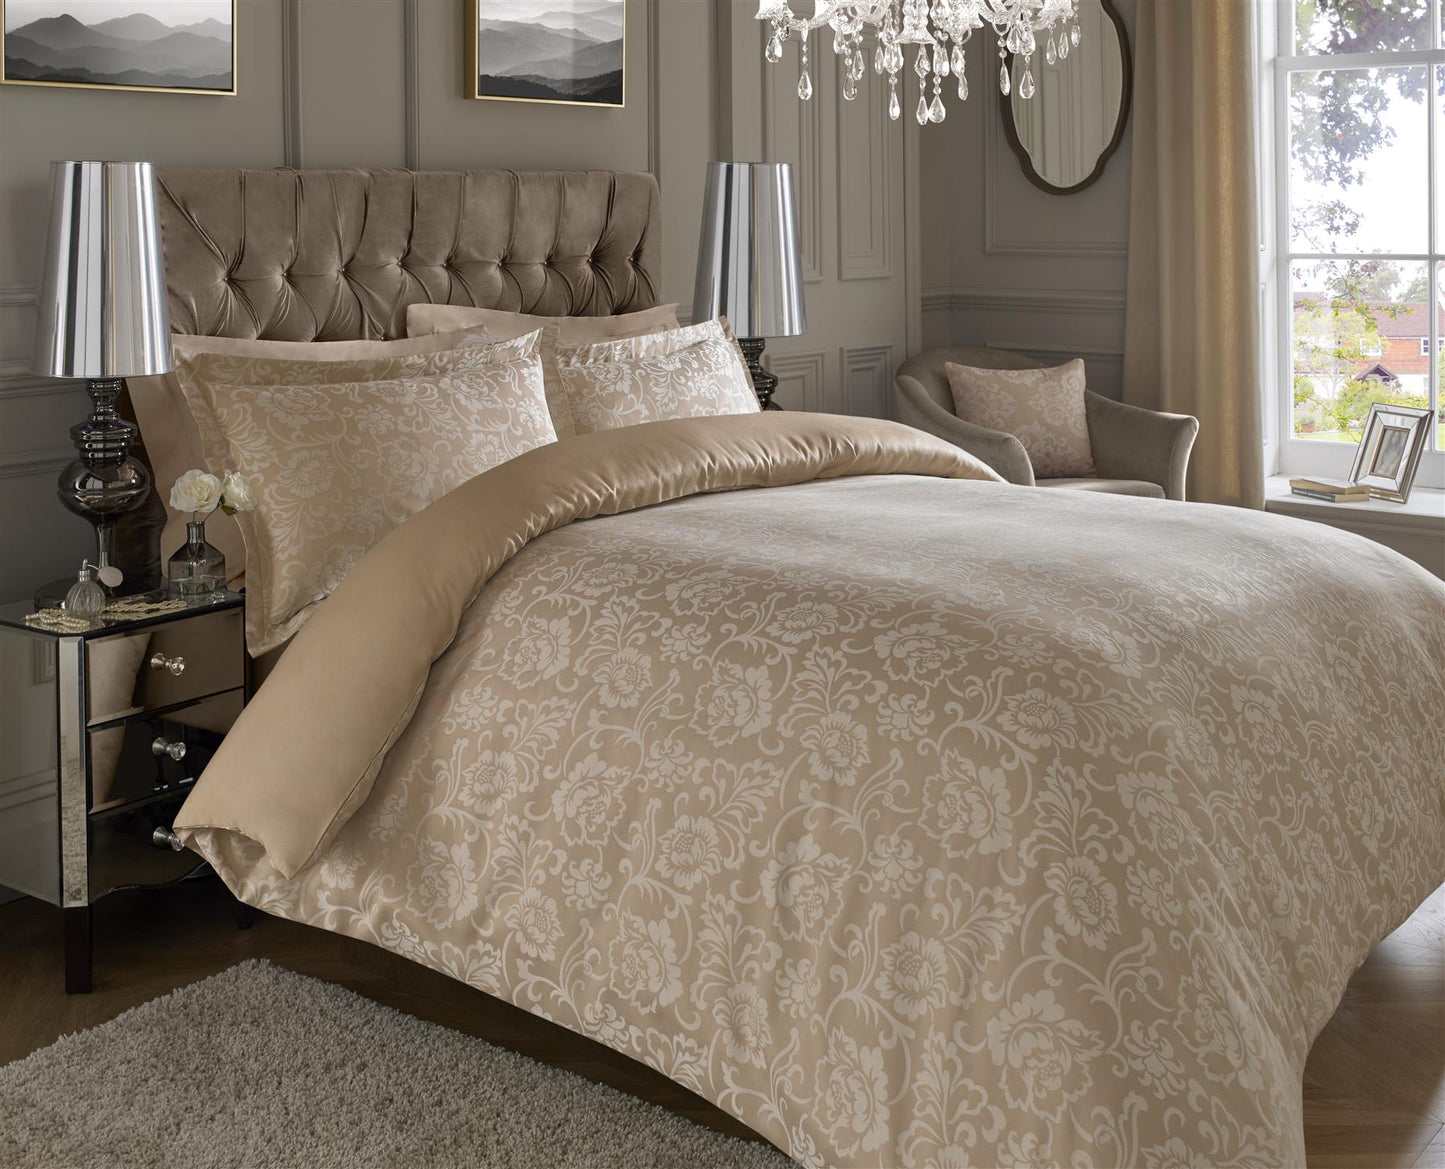 Add a Touch of Elegance with a Floral Jacquard Duvet Cover